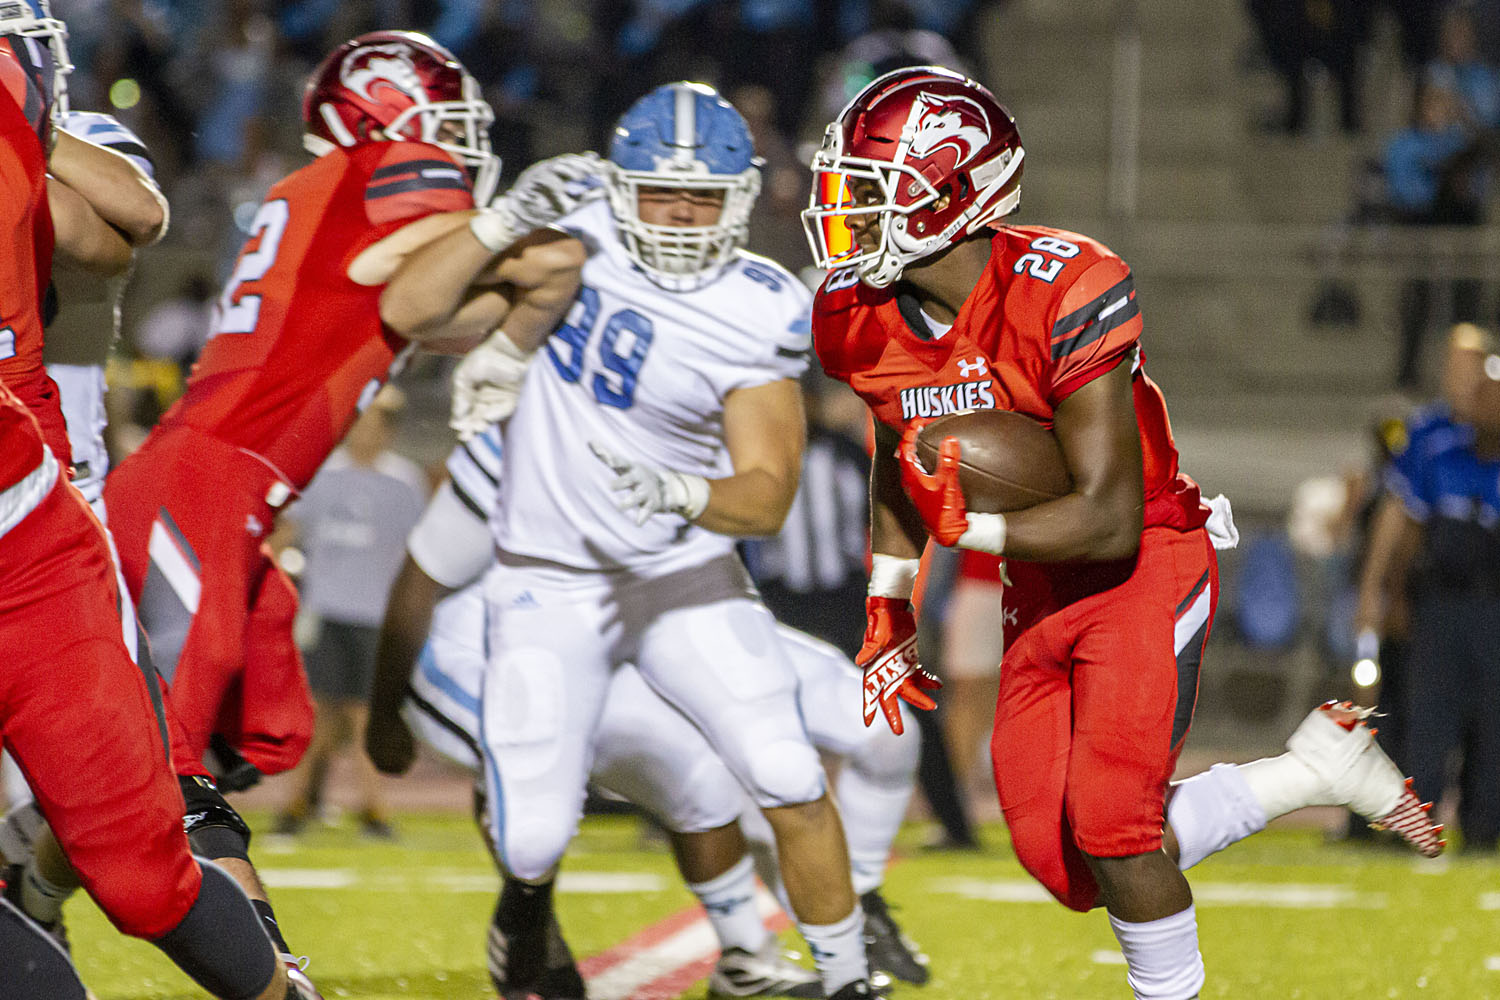 Photo Gallery: Hewitt-Trussville falls to Spain Park on last-second touchdown